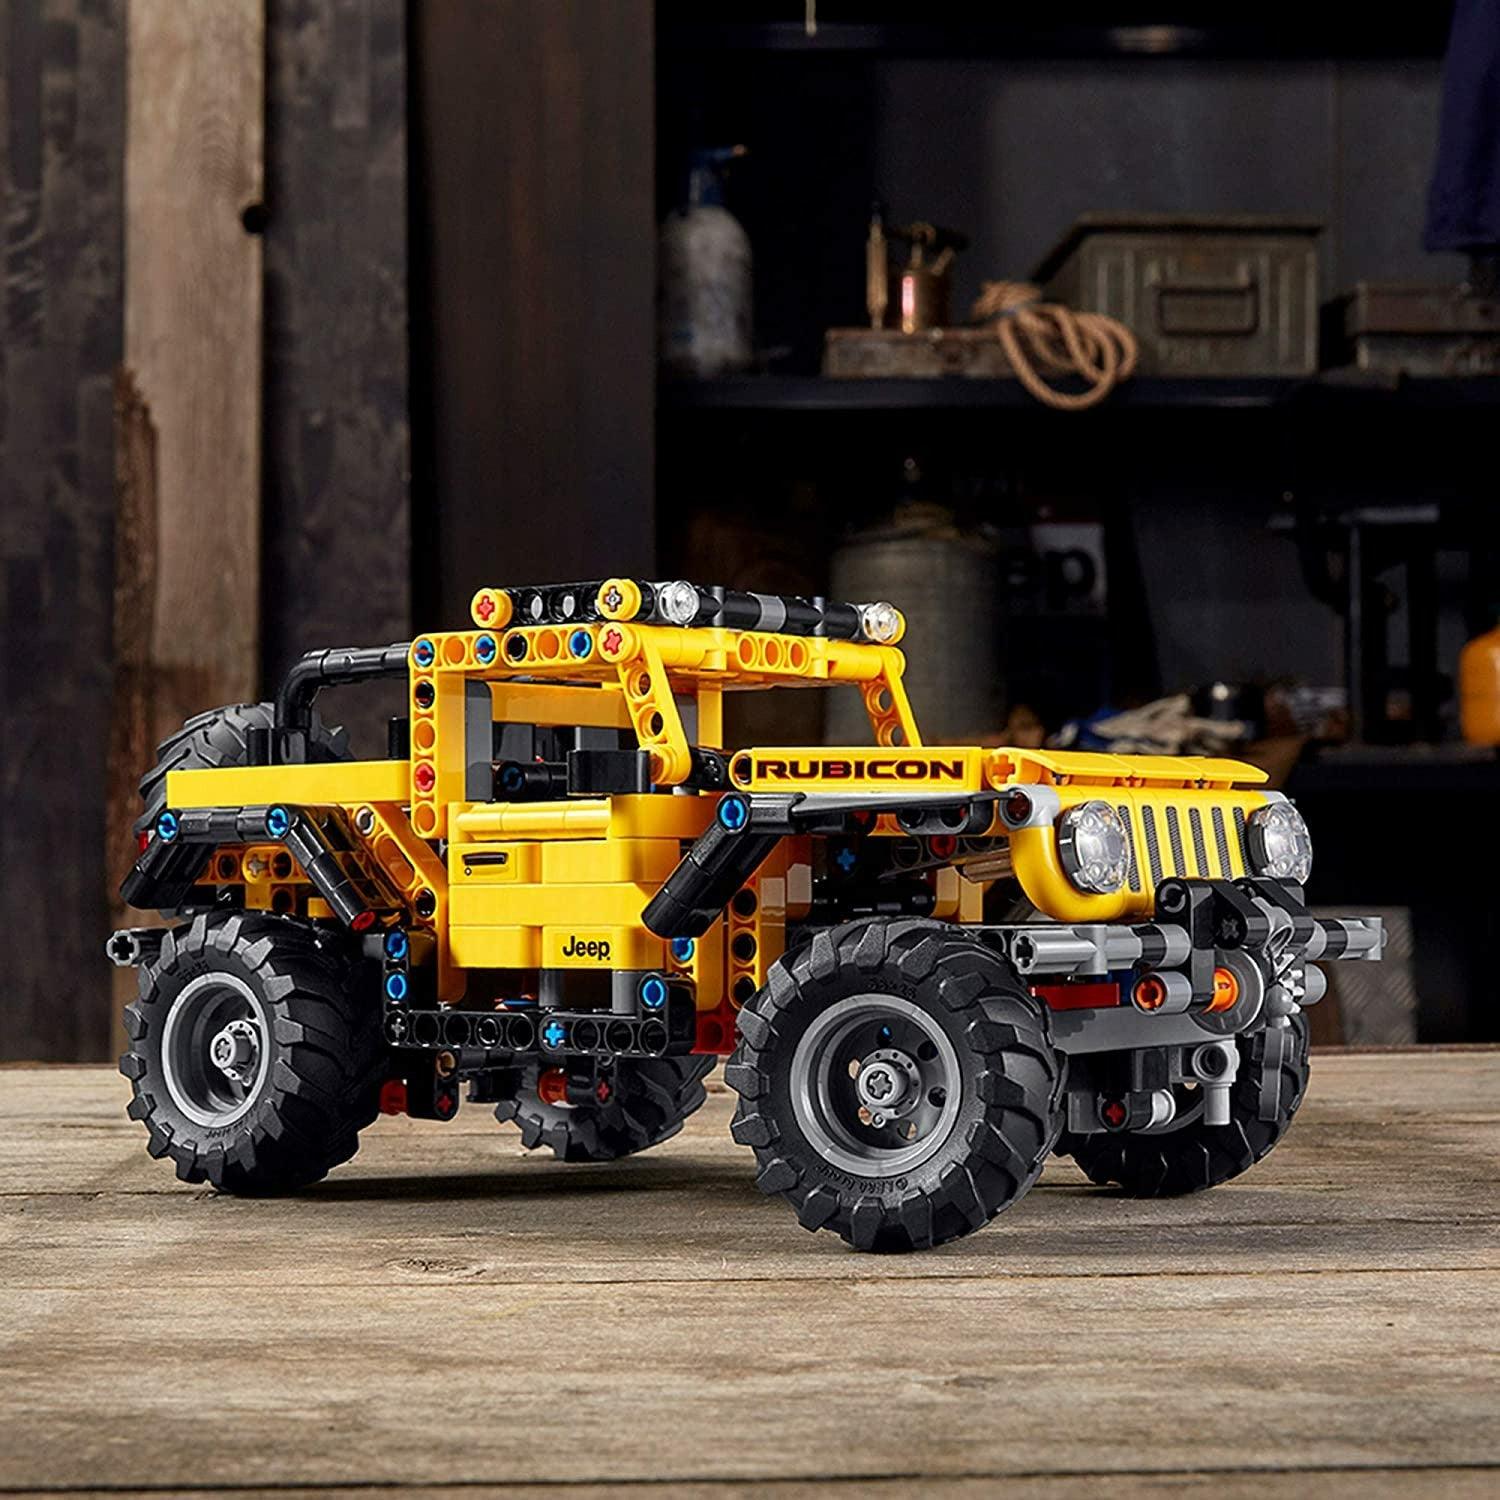 LEGO Technic Jeep Wrangler 42122 An Engaging Model Building Kit (665 Pieces) - BumbleToys - 18+, 5-7 Years, 8+ Years, 8-13 Years, Boys, Clearance, LEGO, OXE, Pre-Order, Technic, Wrangler